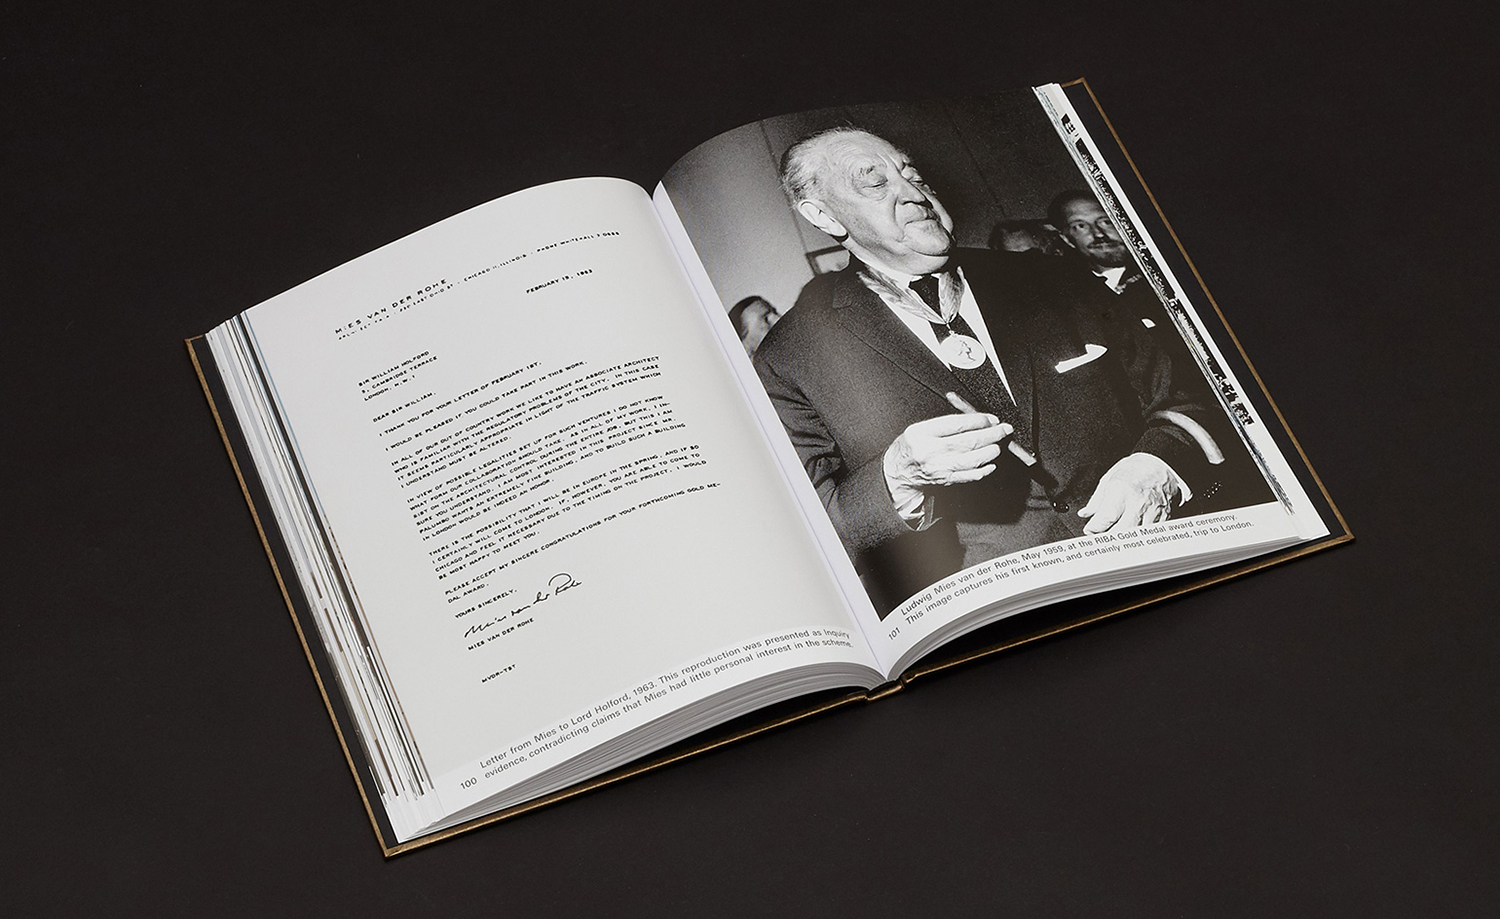 Mies In London published by Real Foundation and designed by OK-RM